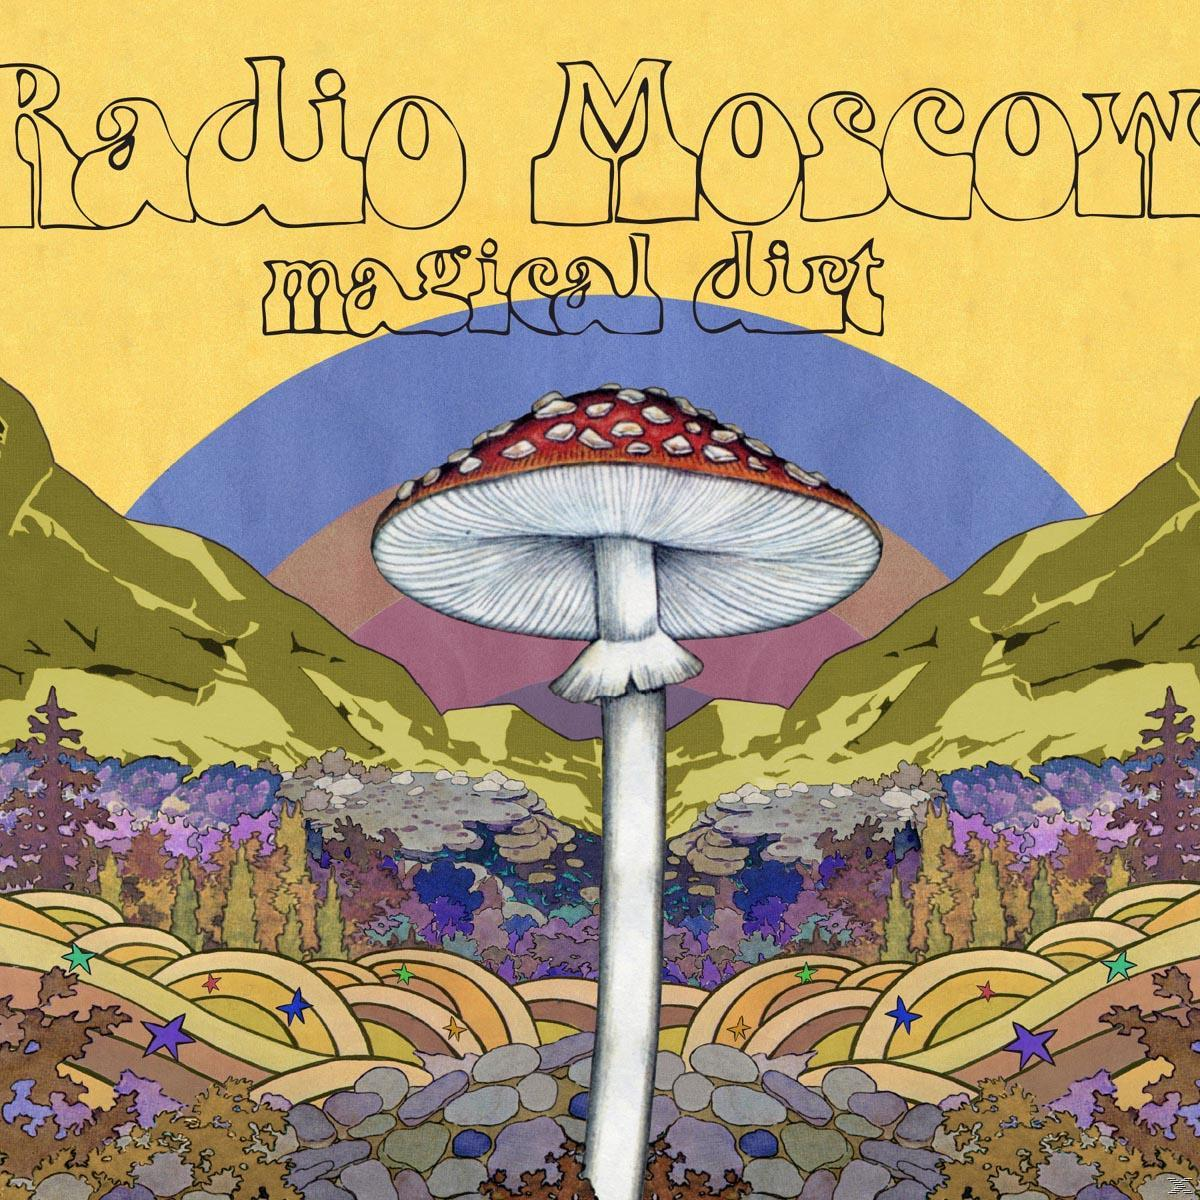 Moscow - Magical (CD) Dirt Radio -